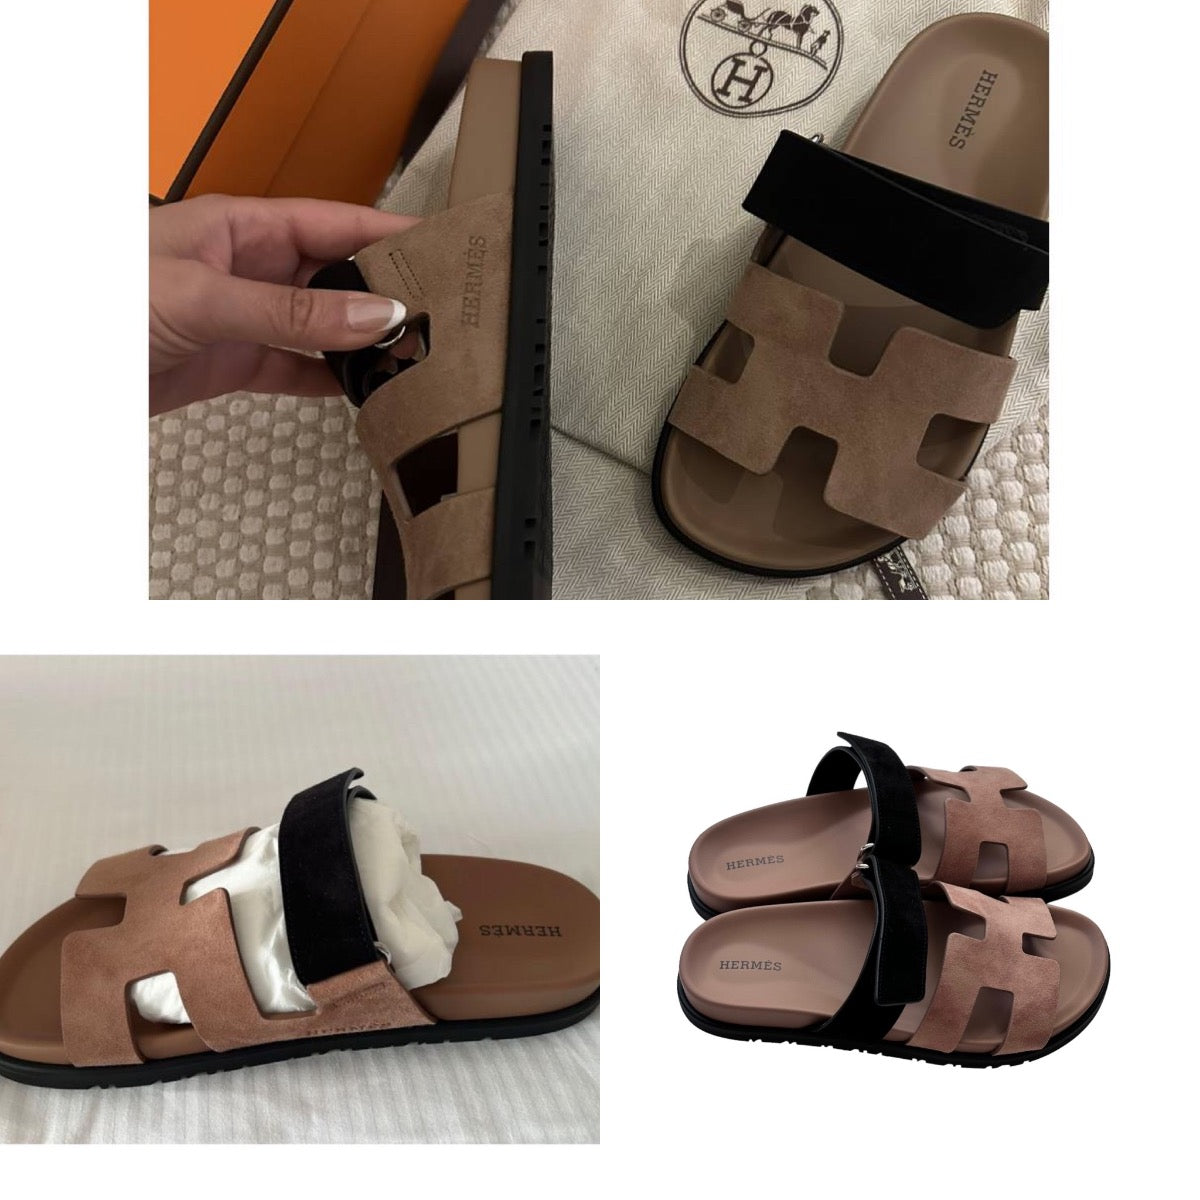 Hermes - chypre sandals in 36 Super rare